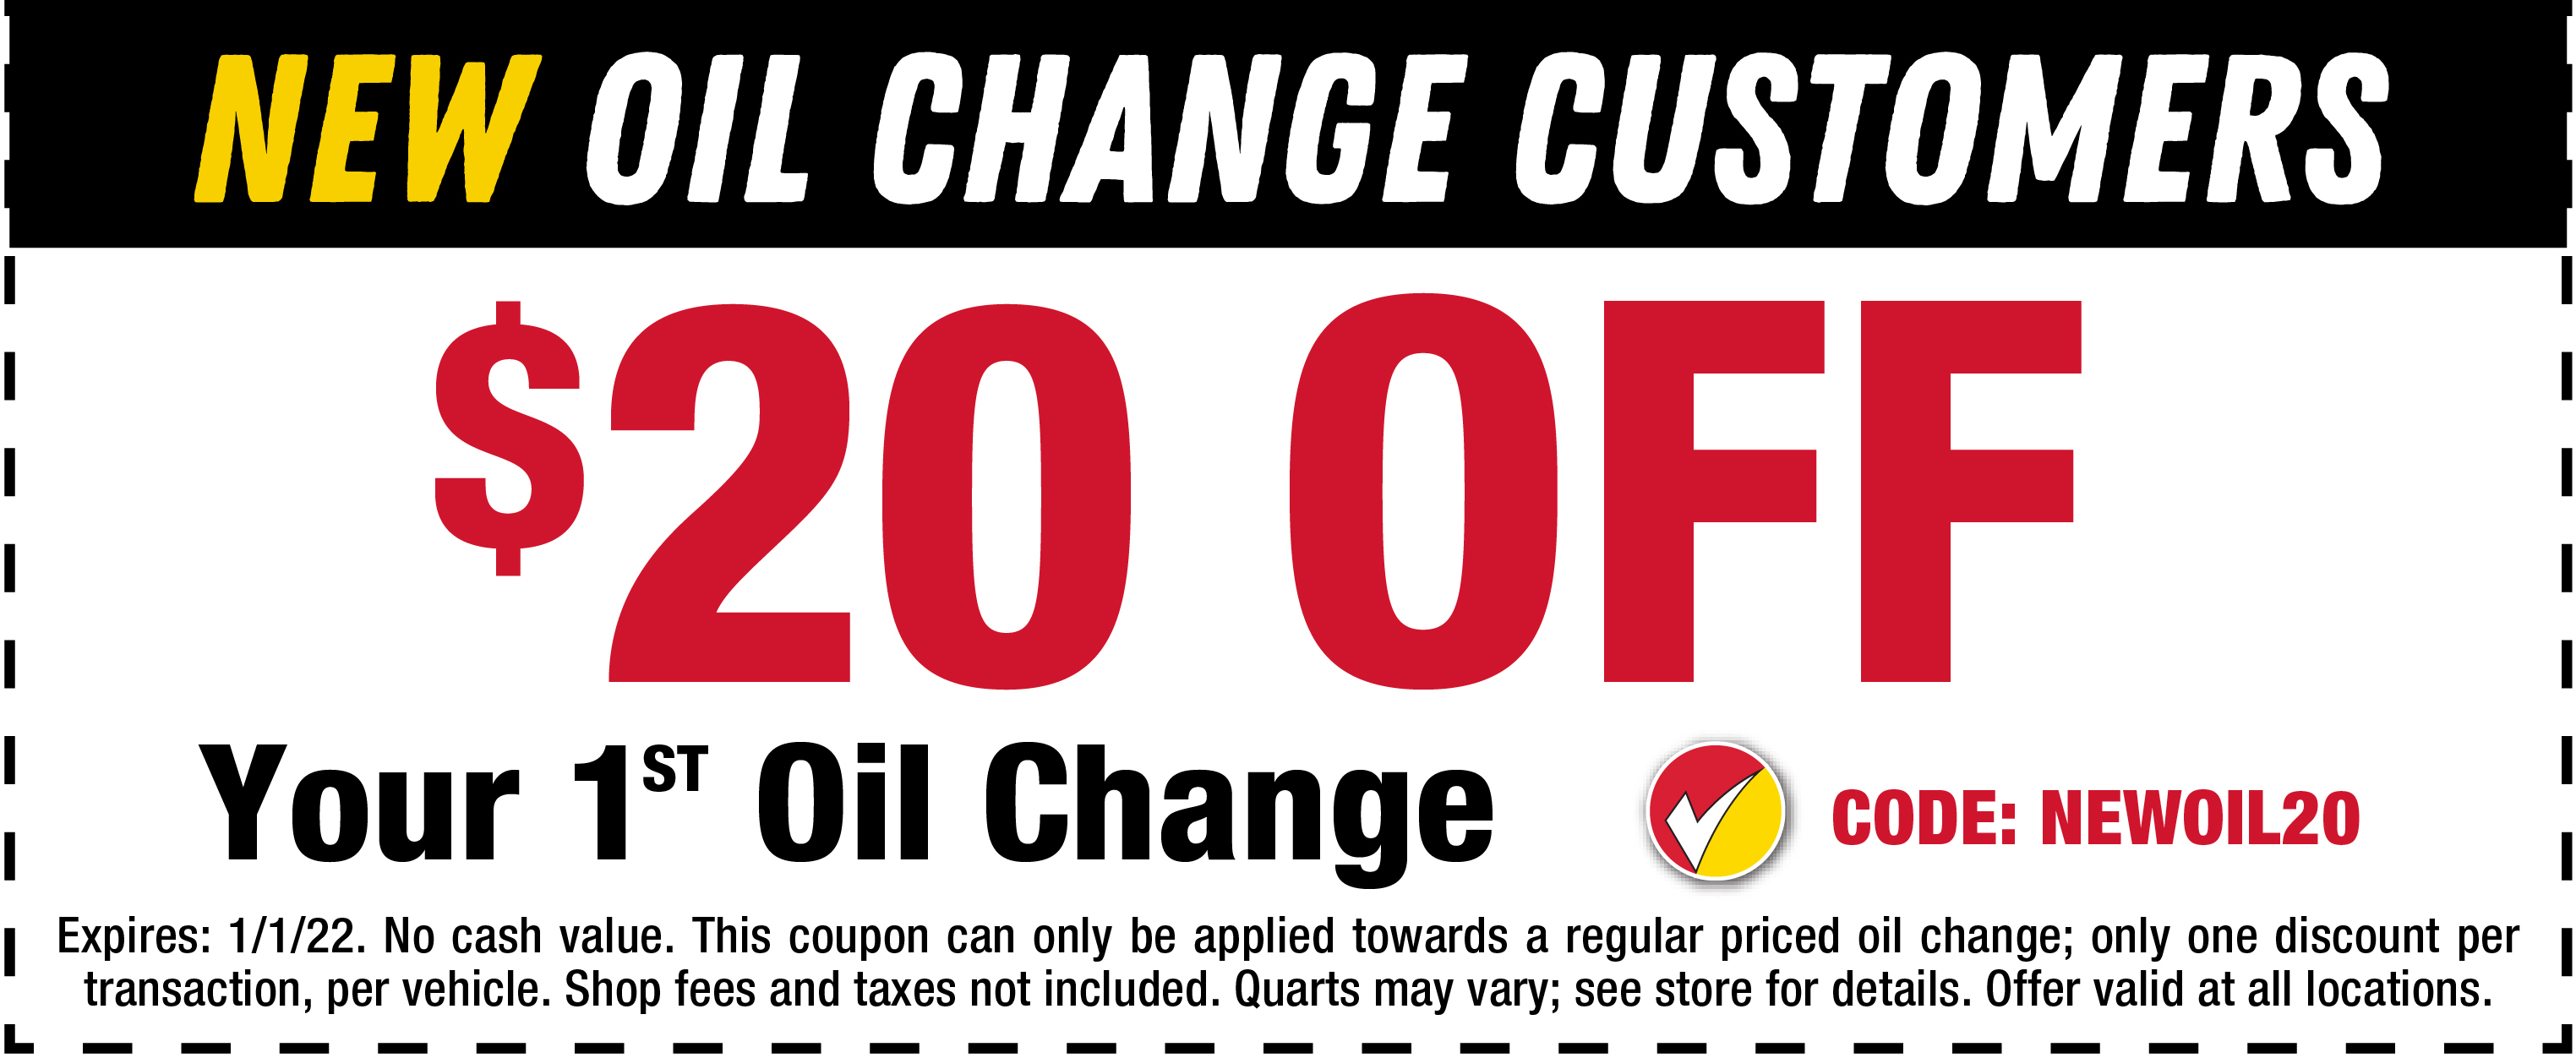 50% off every other oil change!